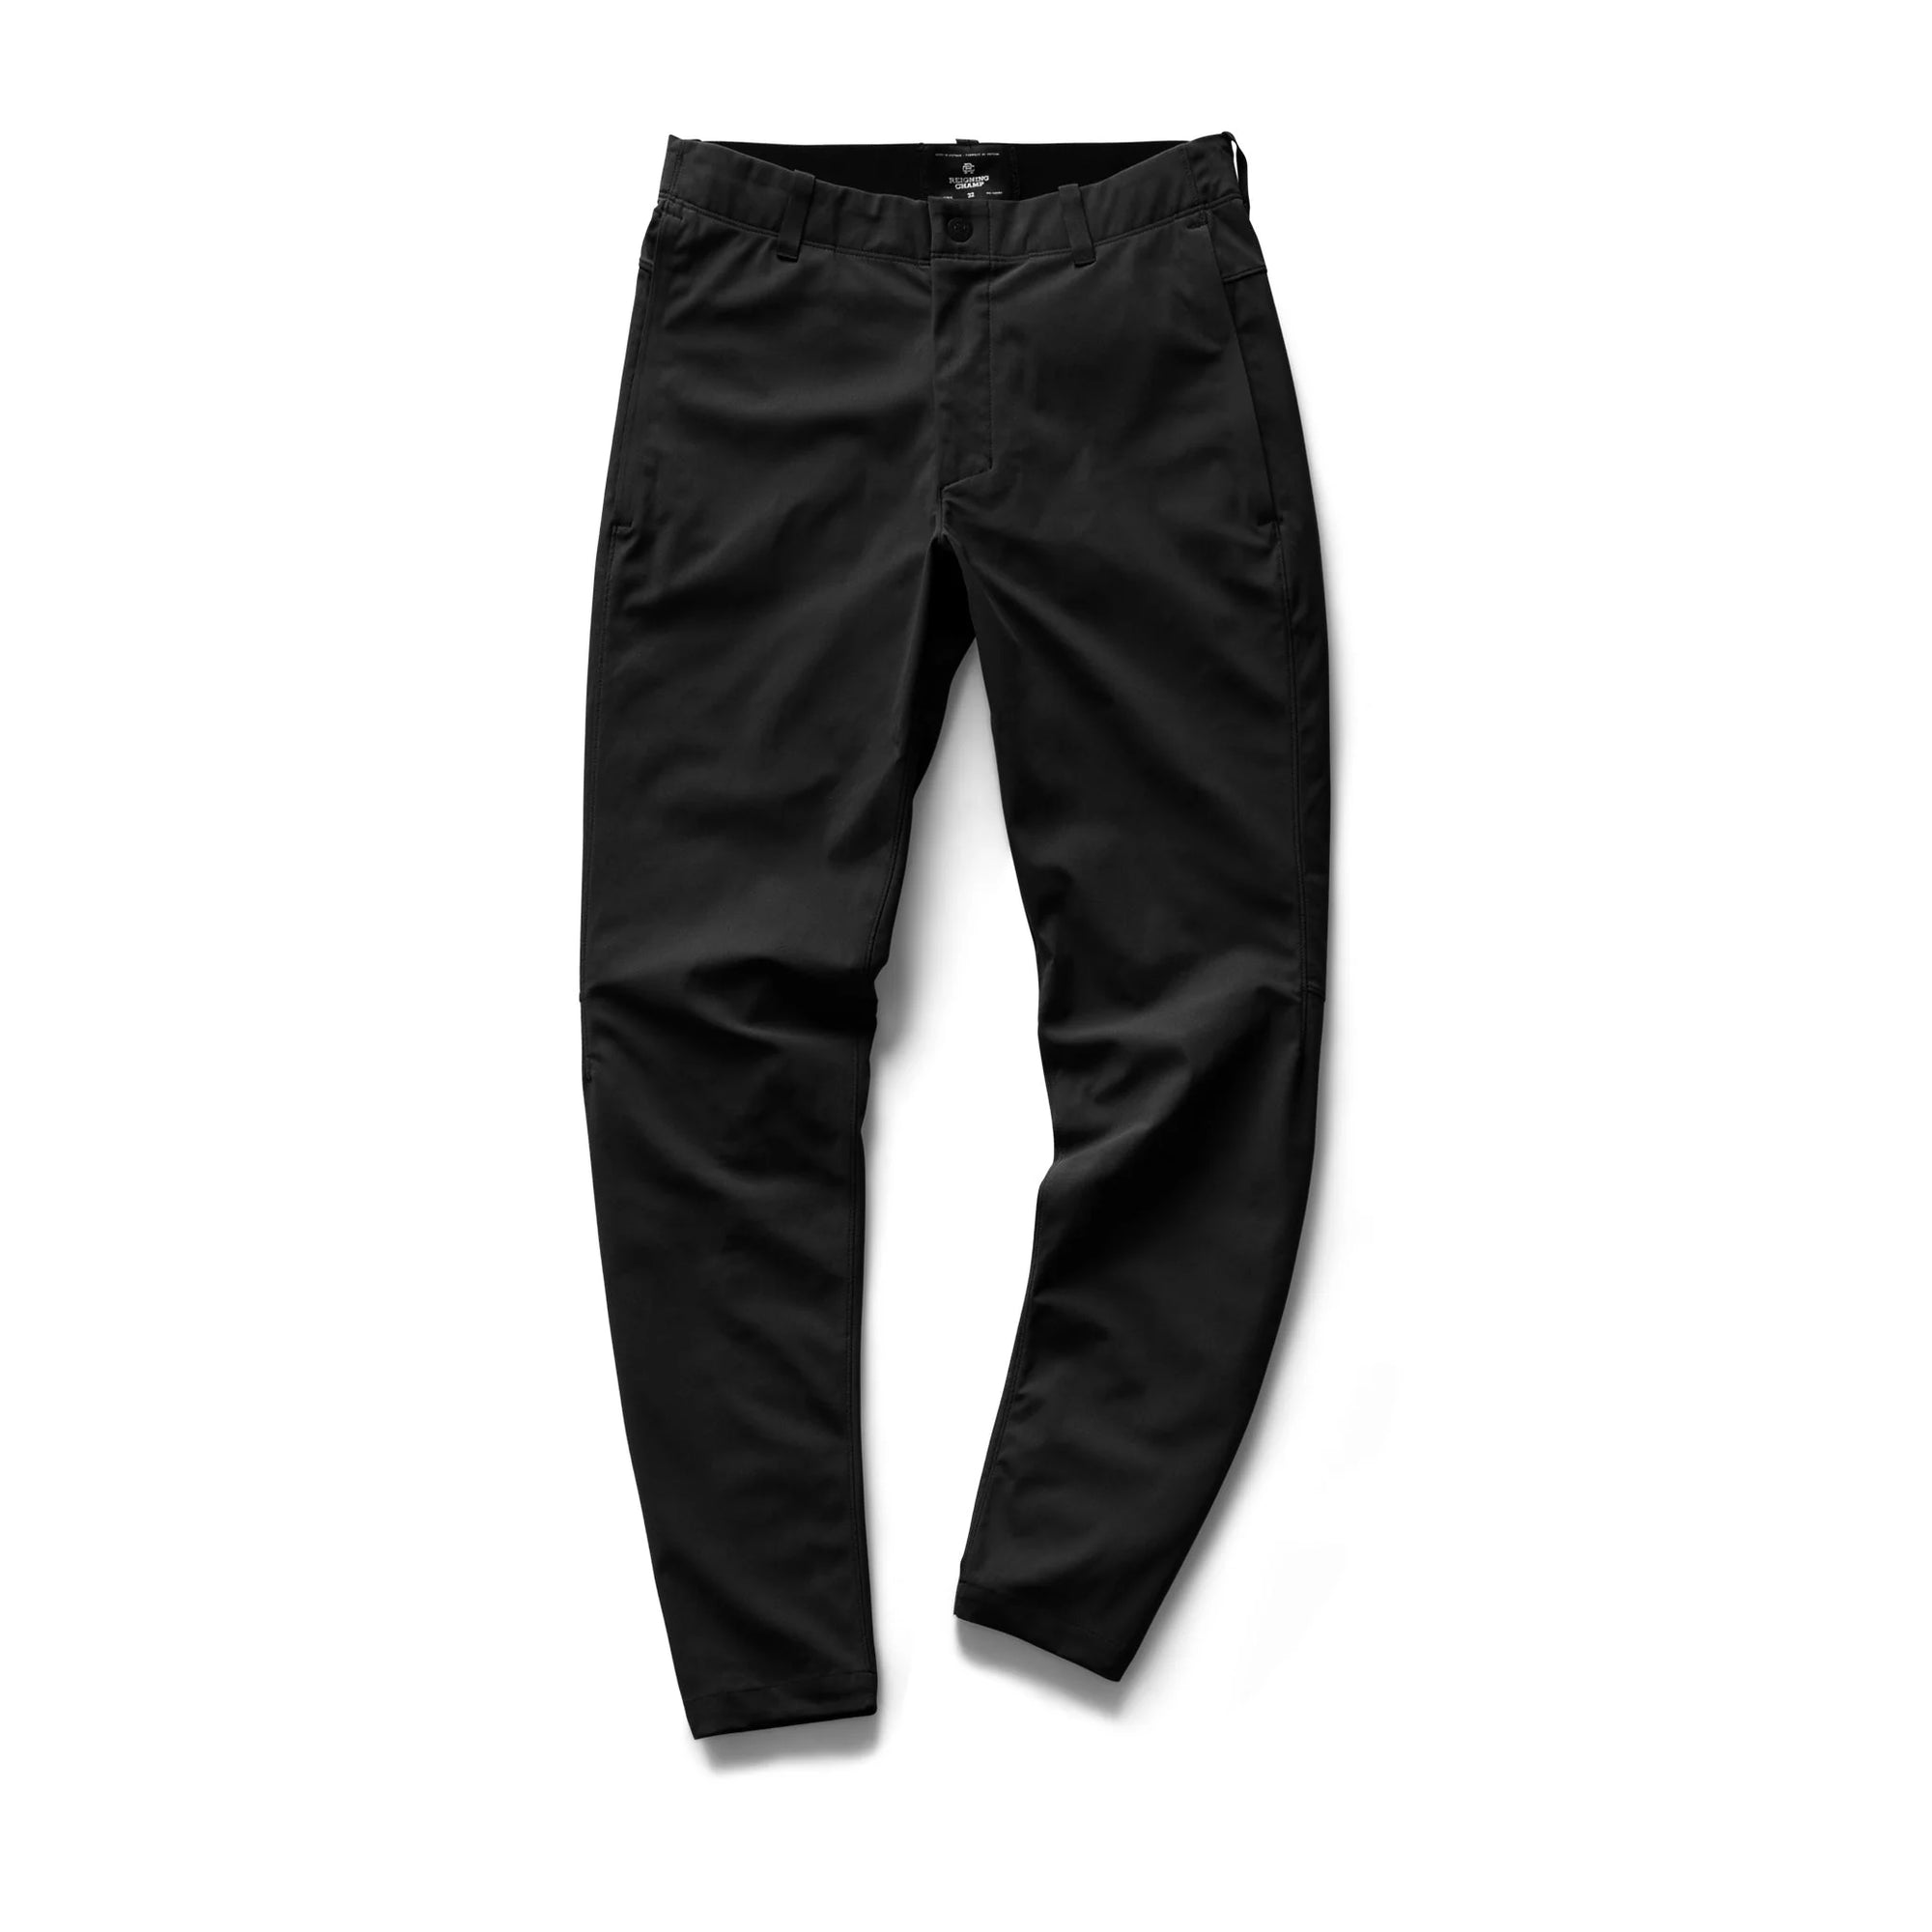 Reigning Champ Coach's Pant in Black